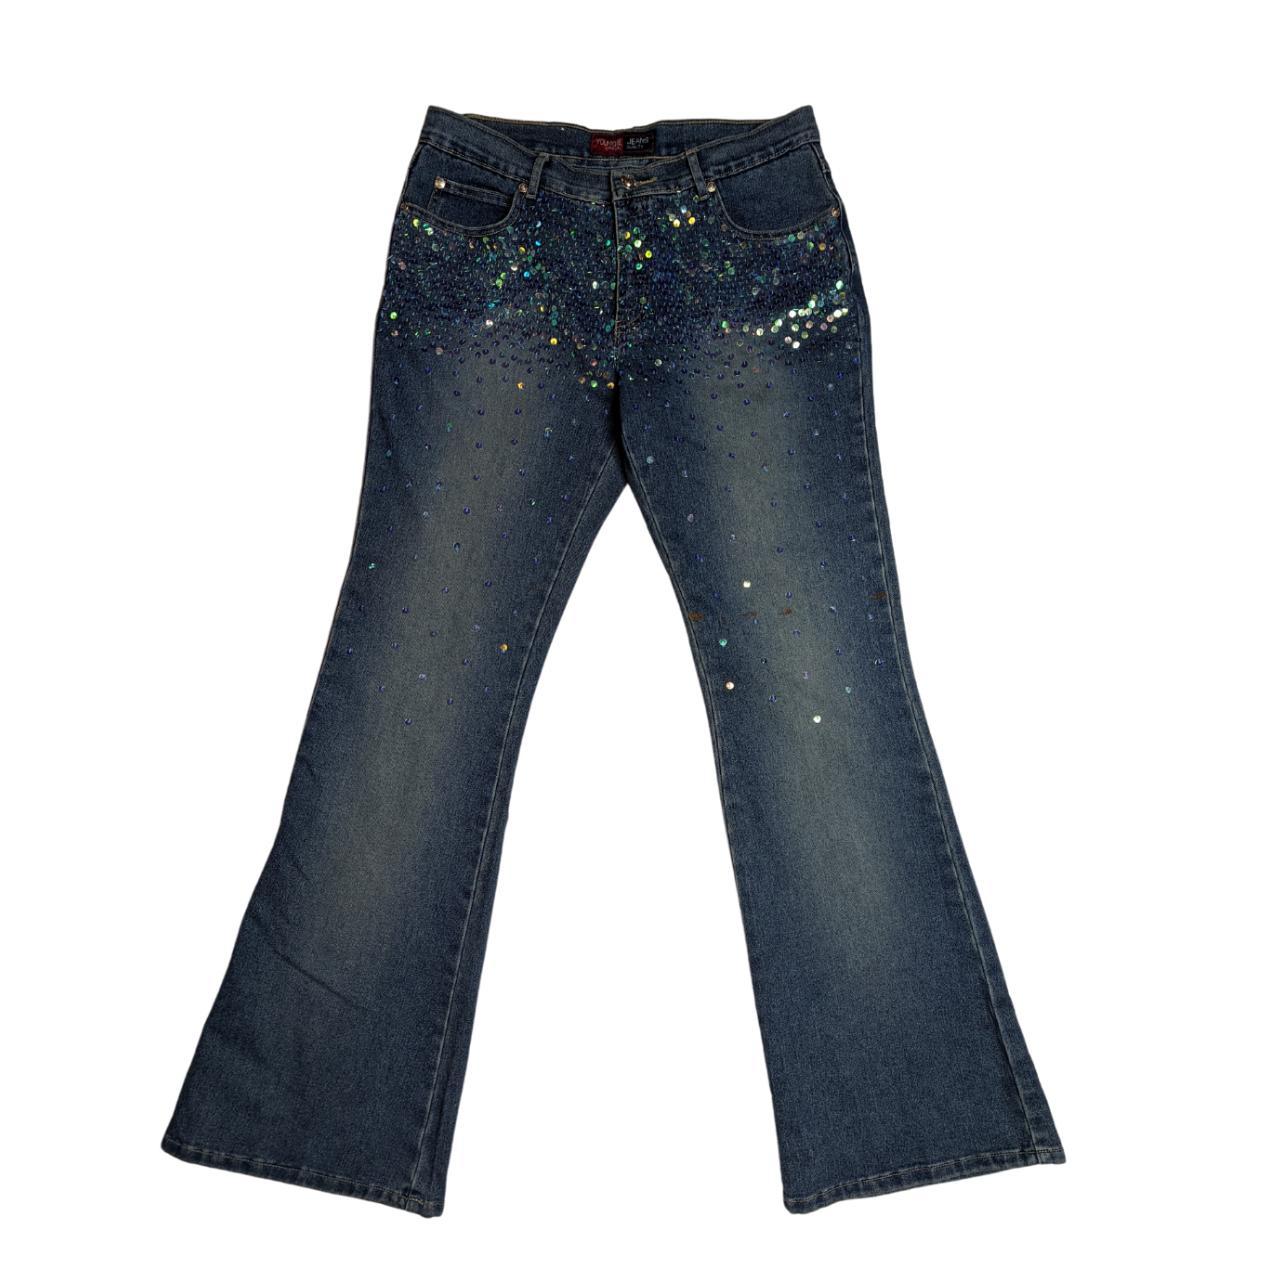 Product Image 1 - Y2k Sequin Flare Jeans
stretchy comfy